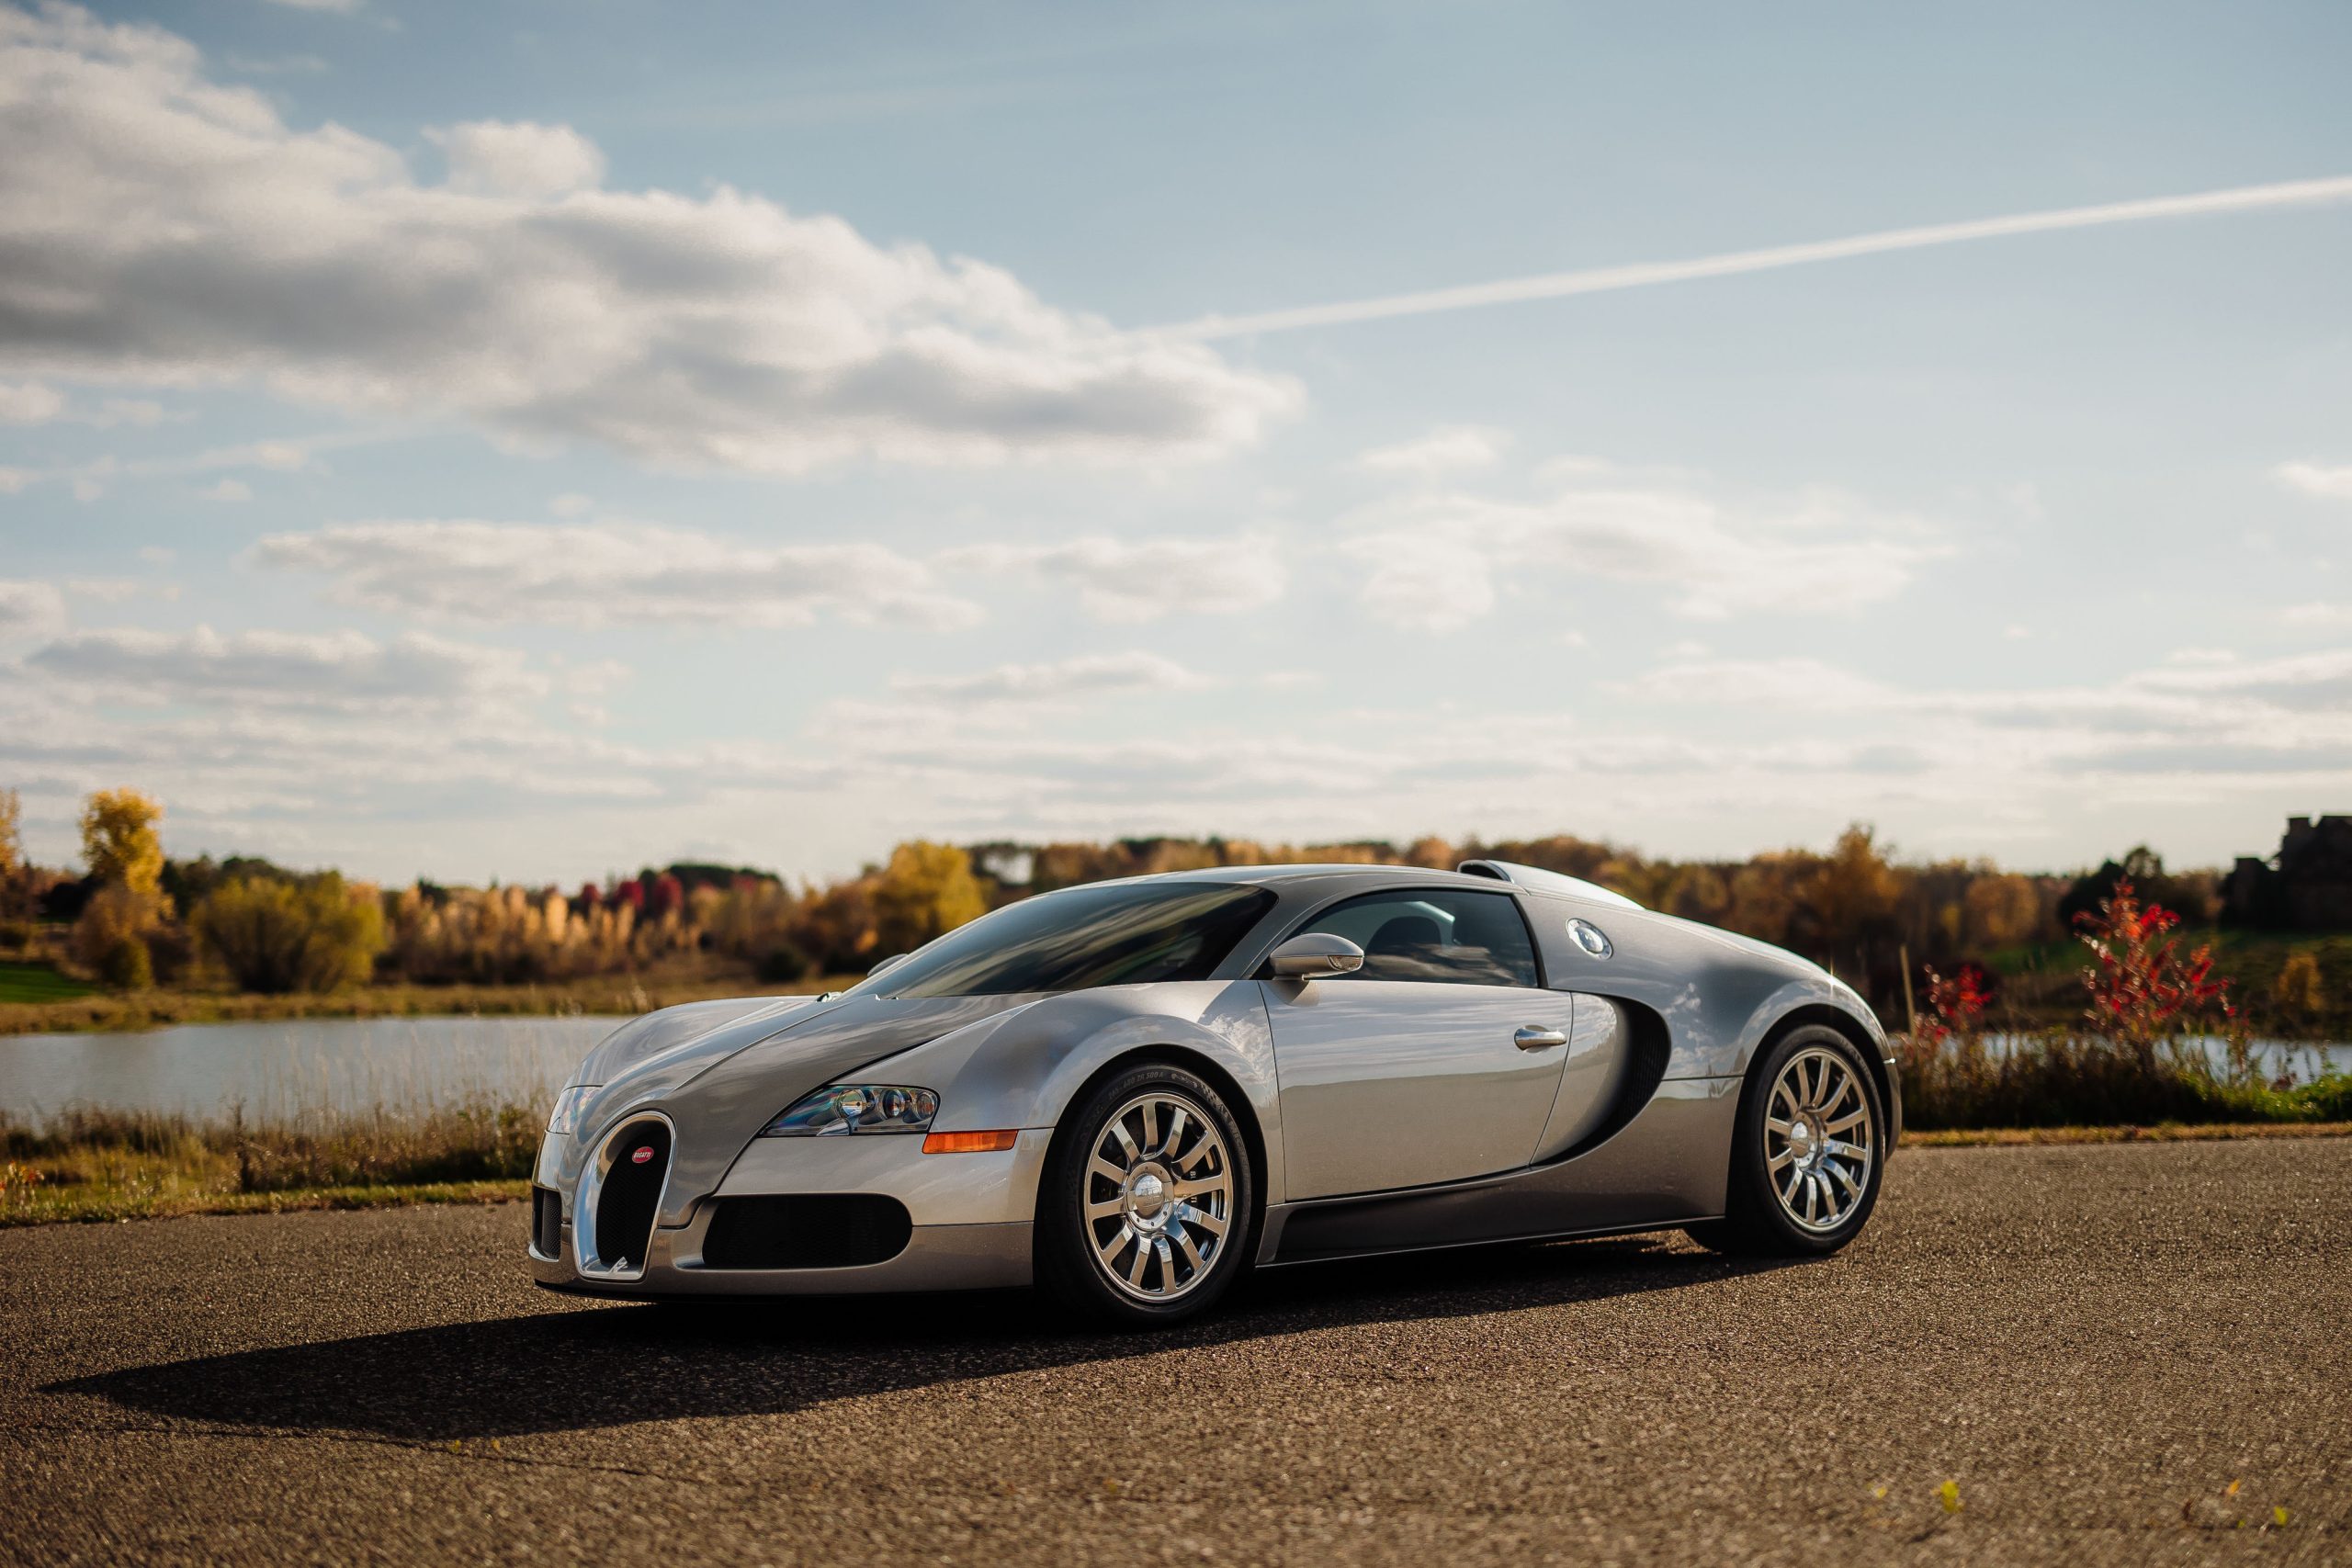 2008 Bugatti Veyron 16.4 | Kris Clewell ©2023 Courtesy of RM Sotheby's